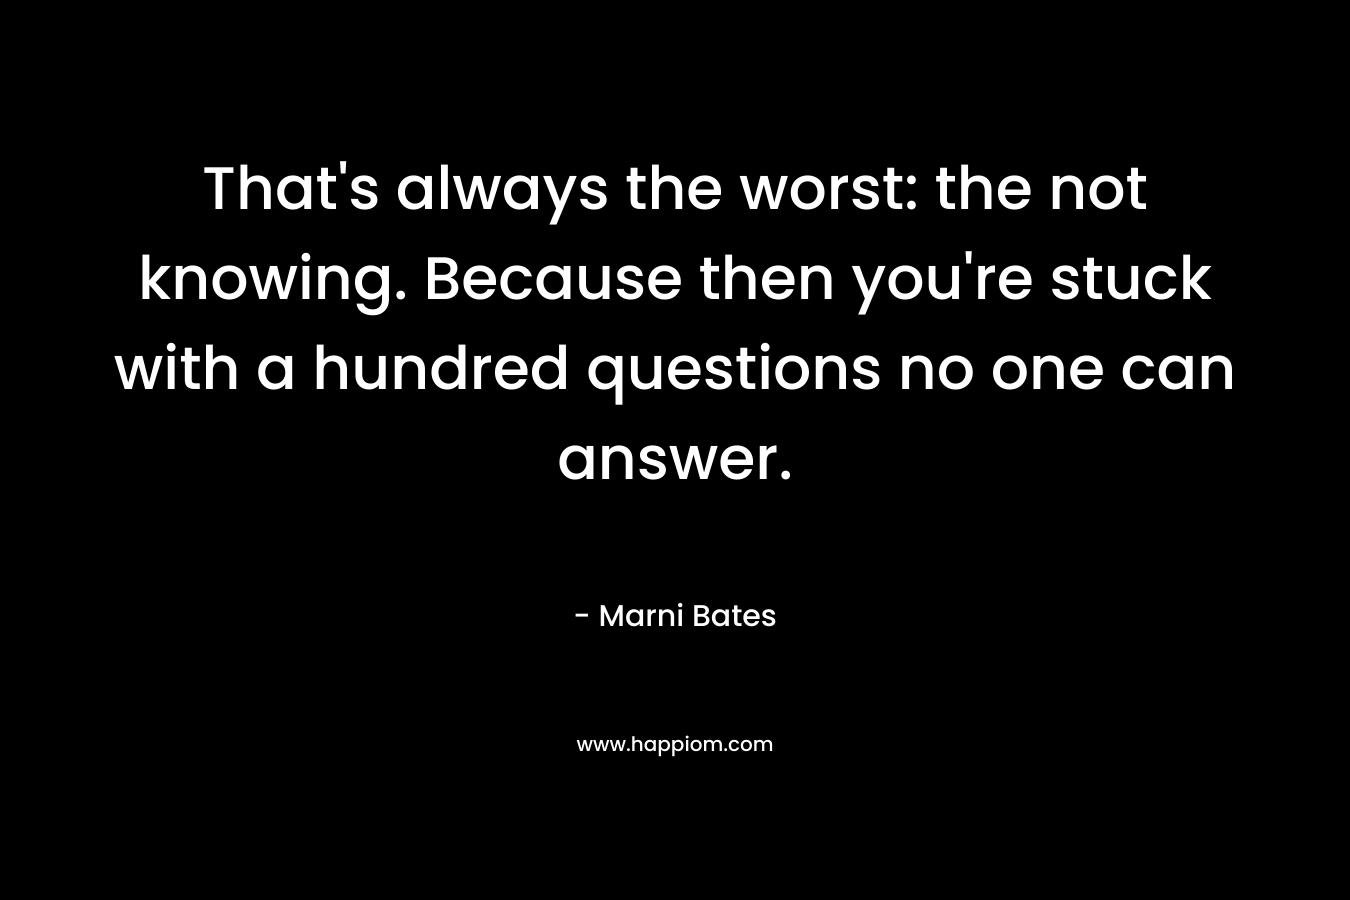 That’s always the worst: the not knowing. Because then you’re stuck with a hundred questions no one can answer. – Marni Bates